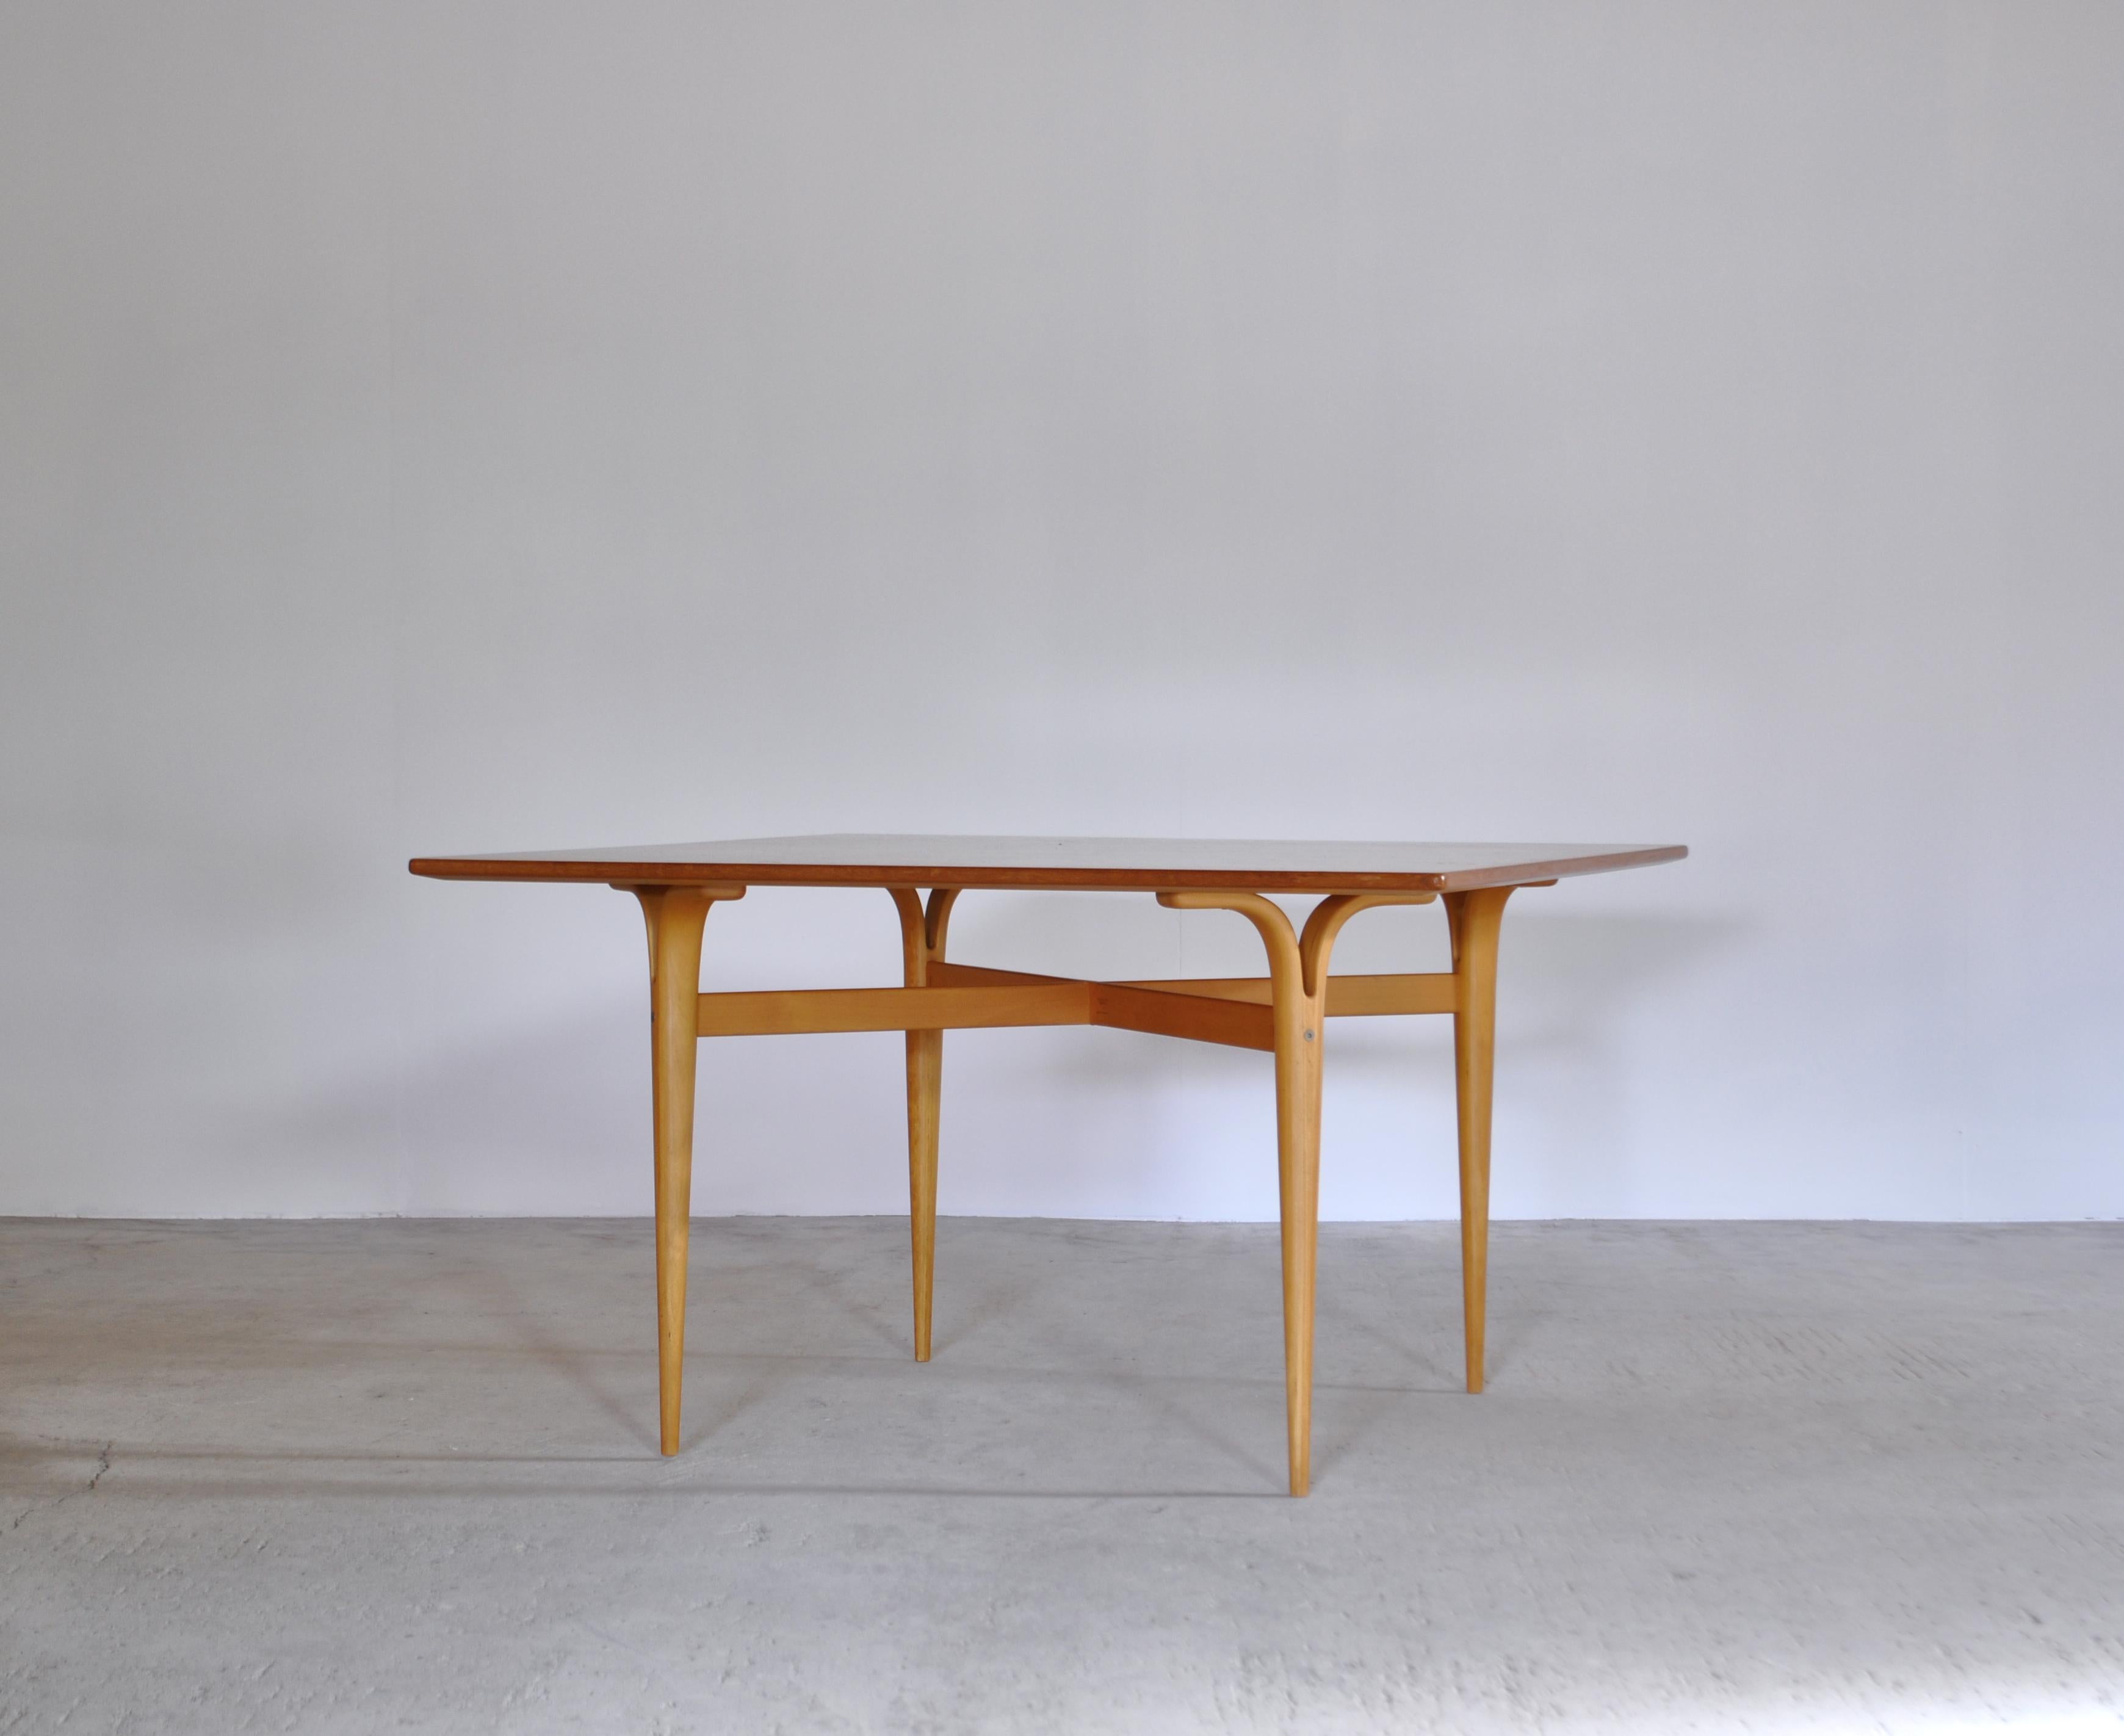 A fine and early example of Bruno Mathsson’s “cleft-leg” table in the square. Designed in 1948, this model was produced by 